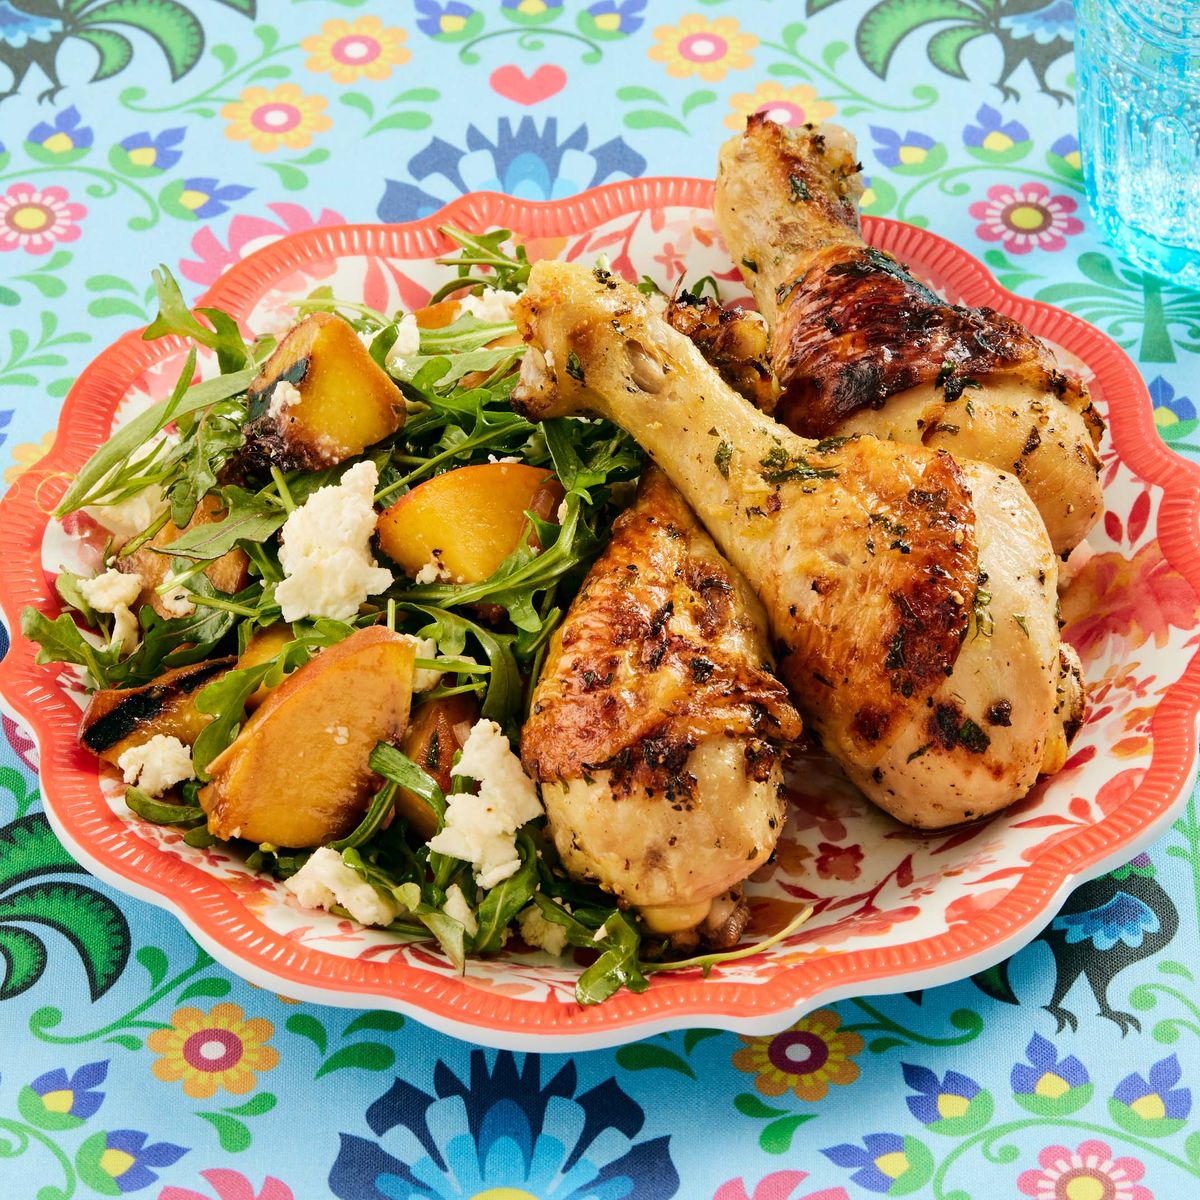 the pioneer woman's chicken drumsticks with grilled peach salad recipe